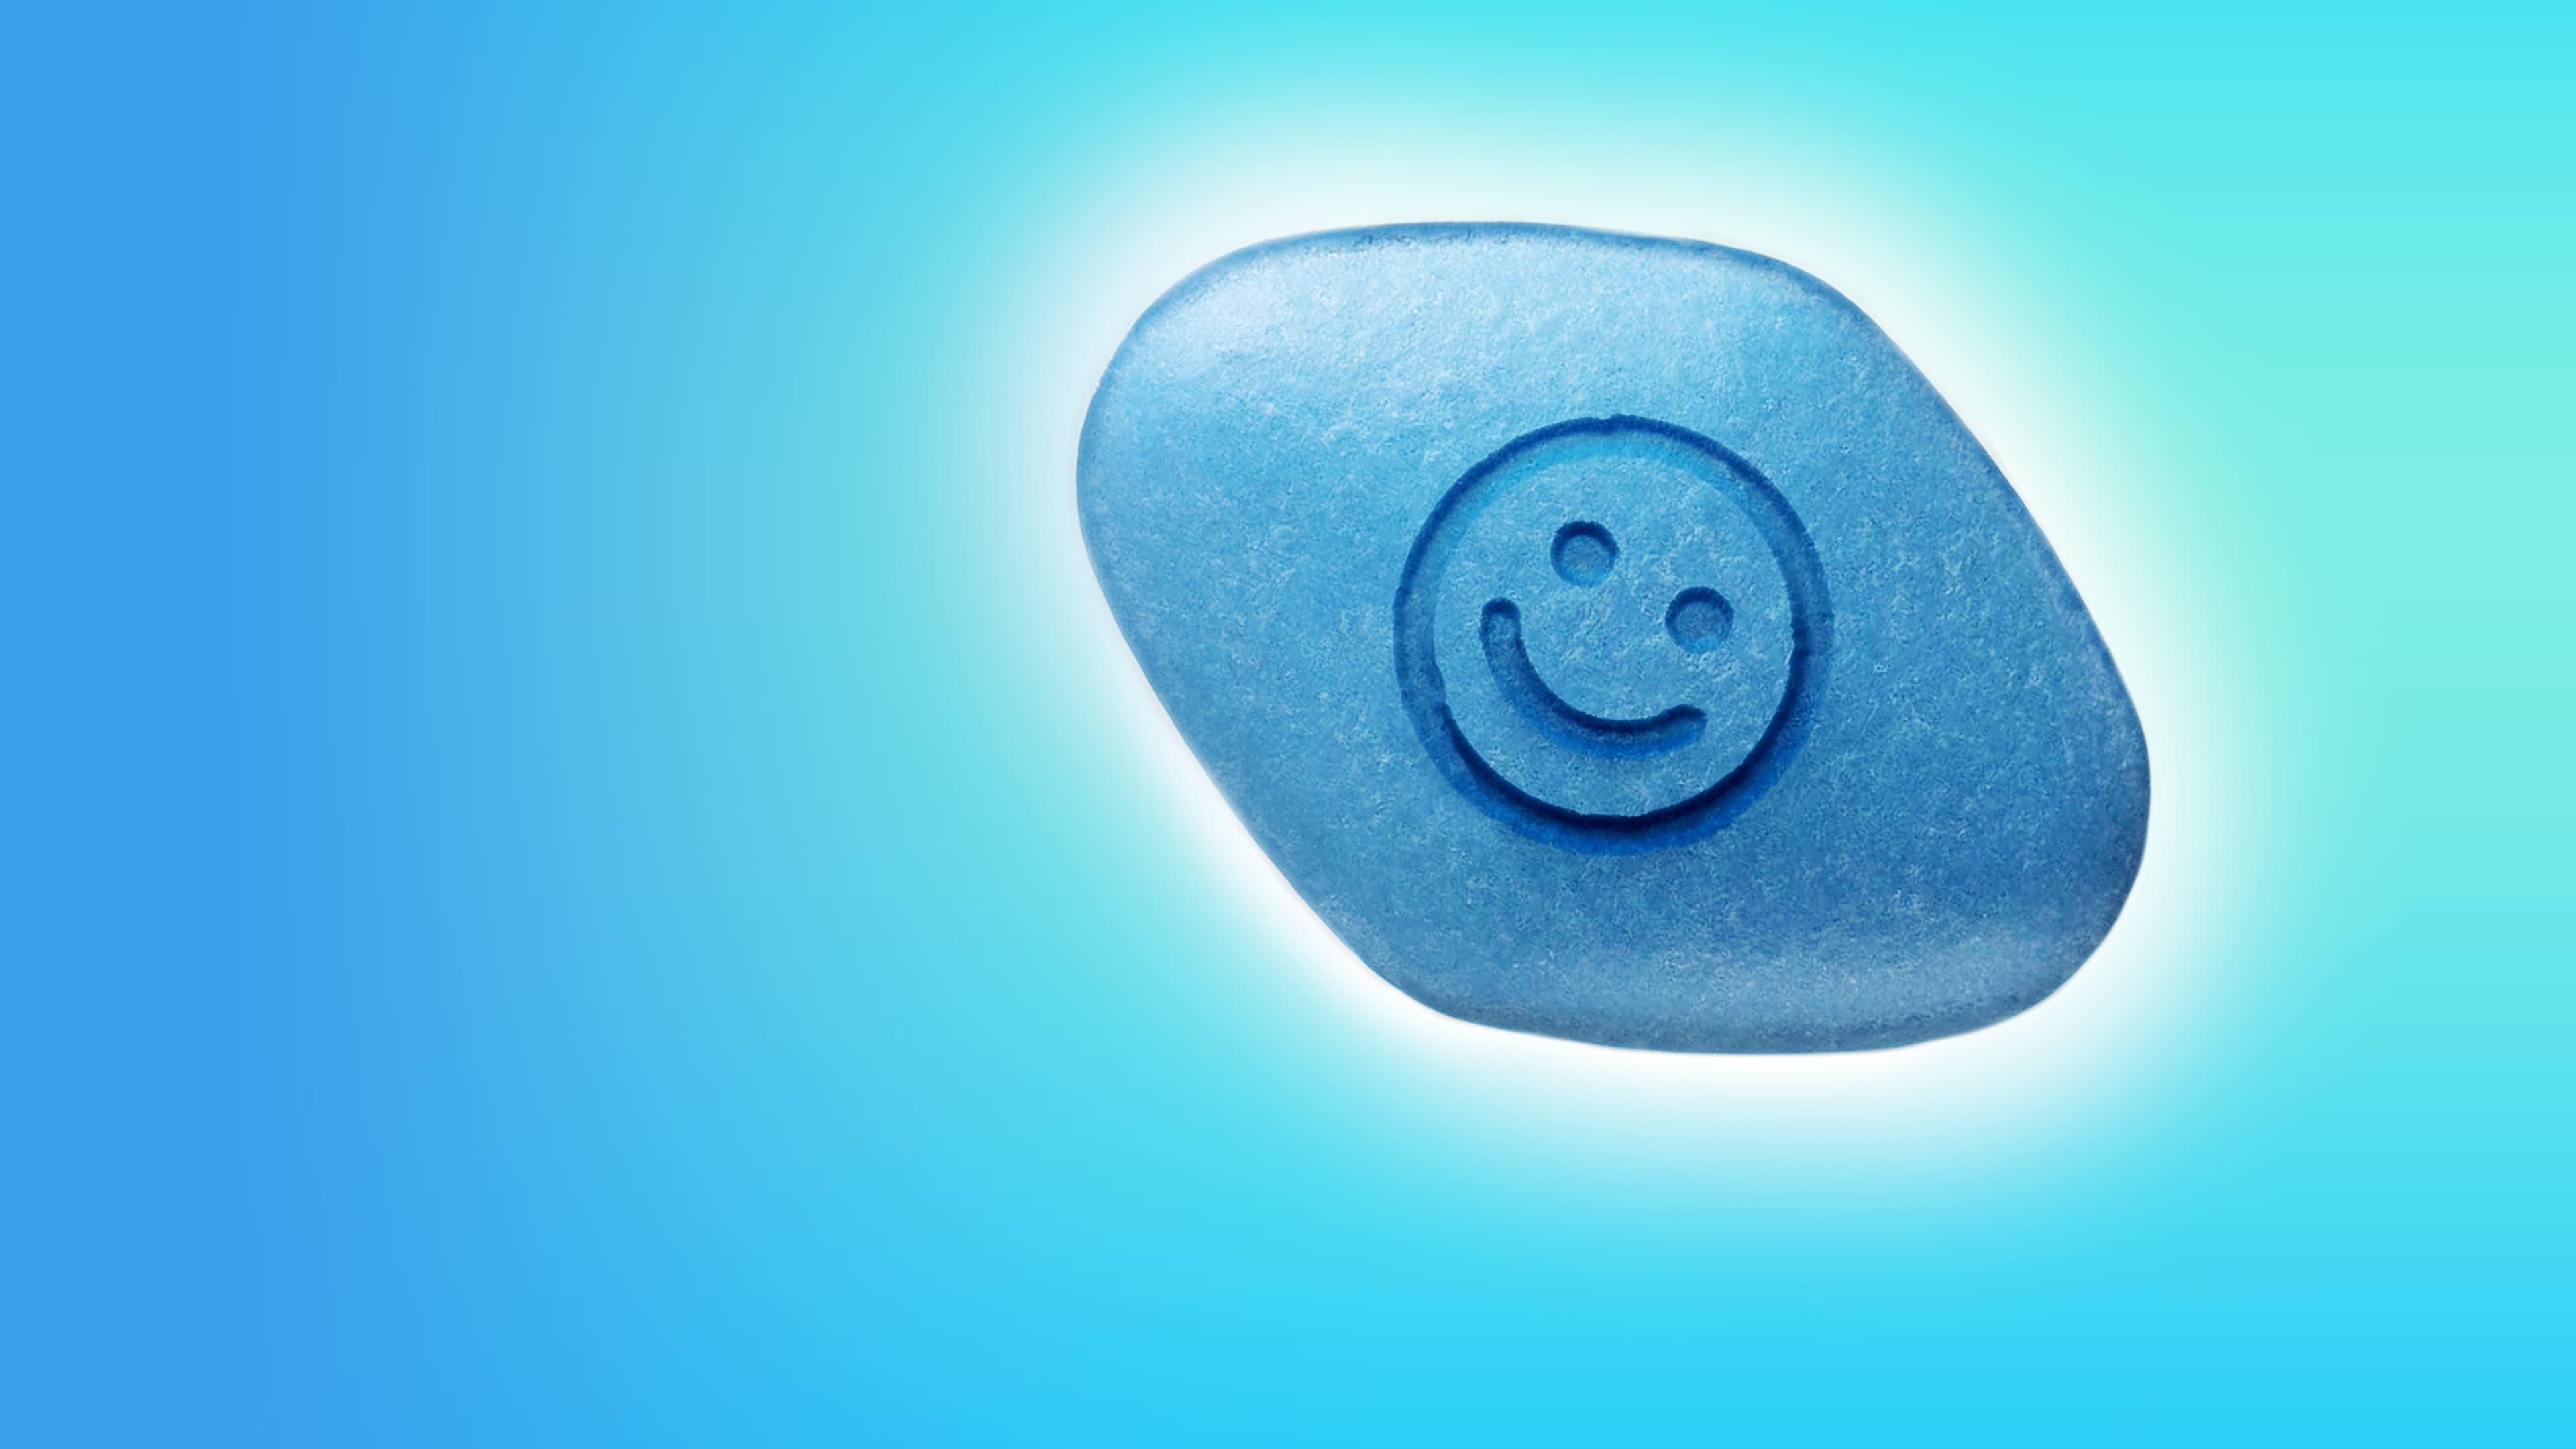 Viagra: The Little Blue Pill That Changed The World backdrop